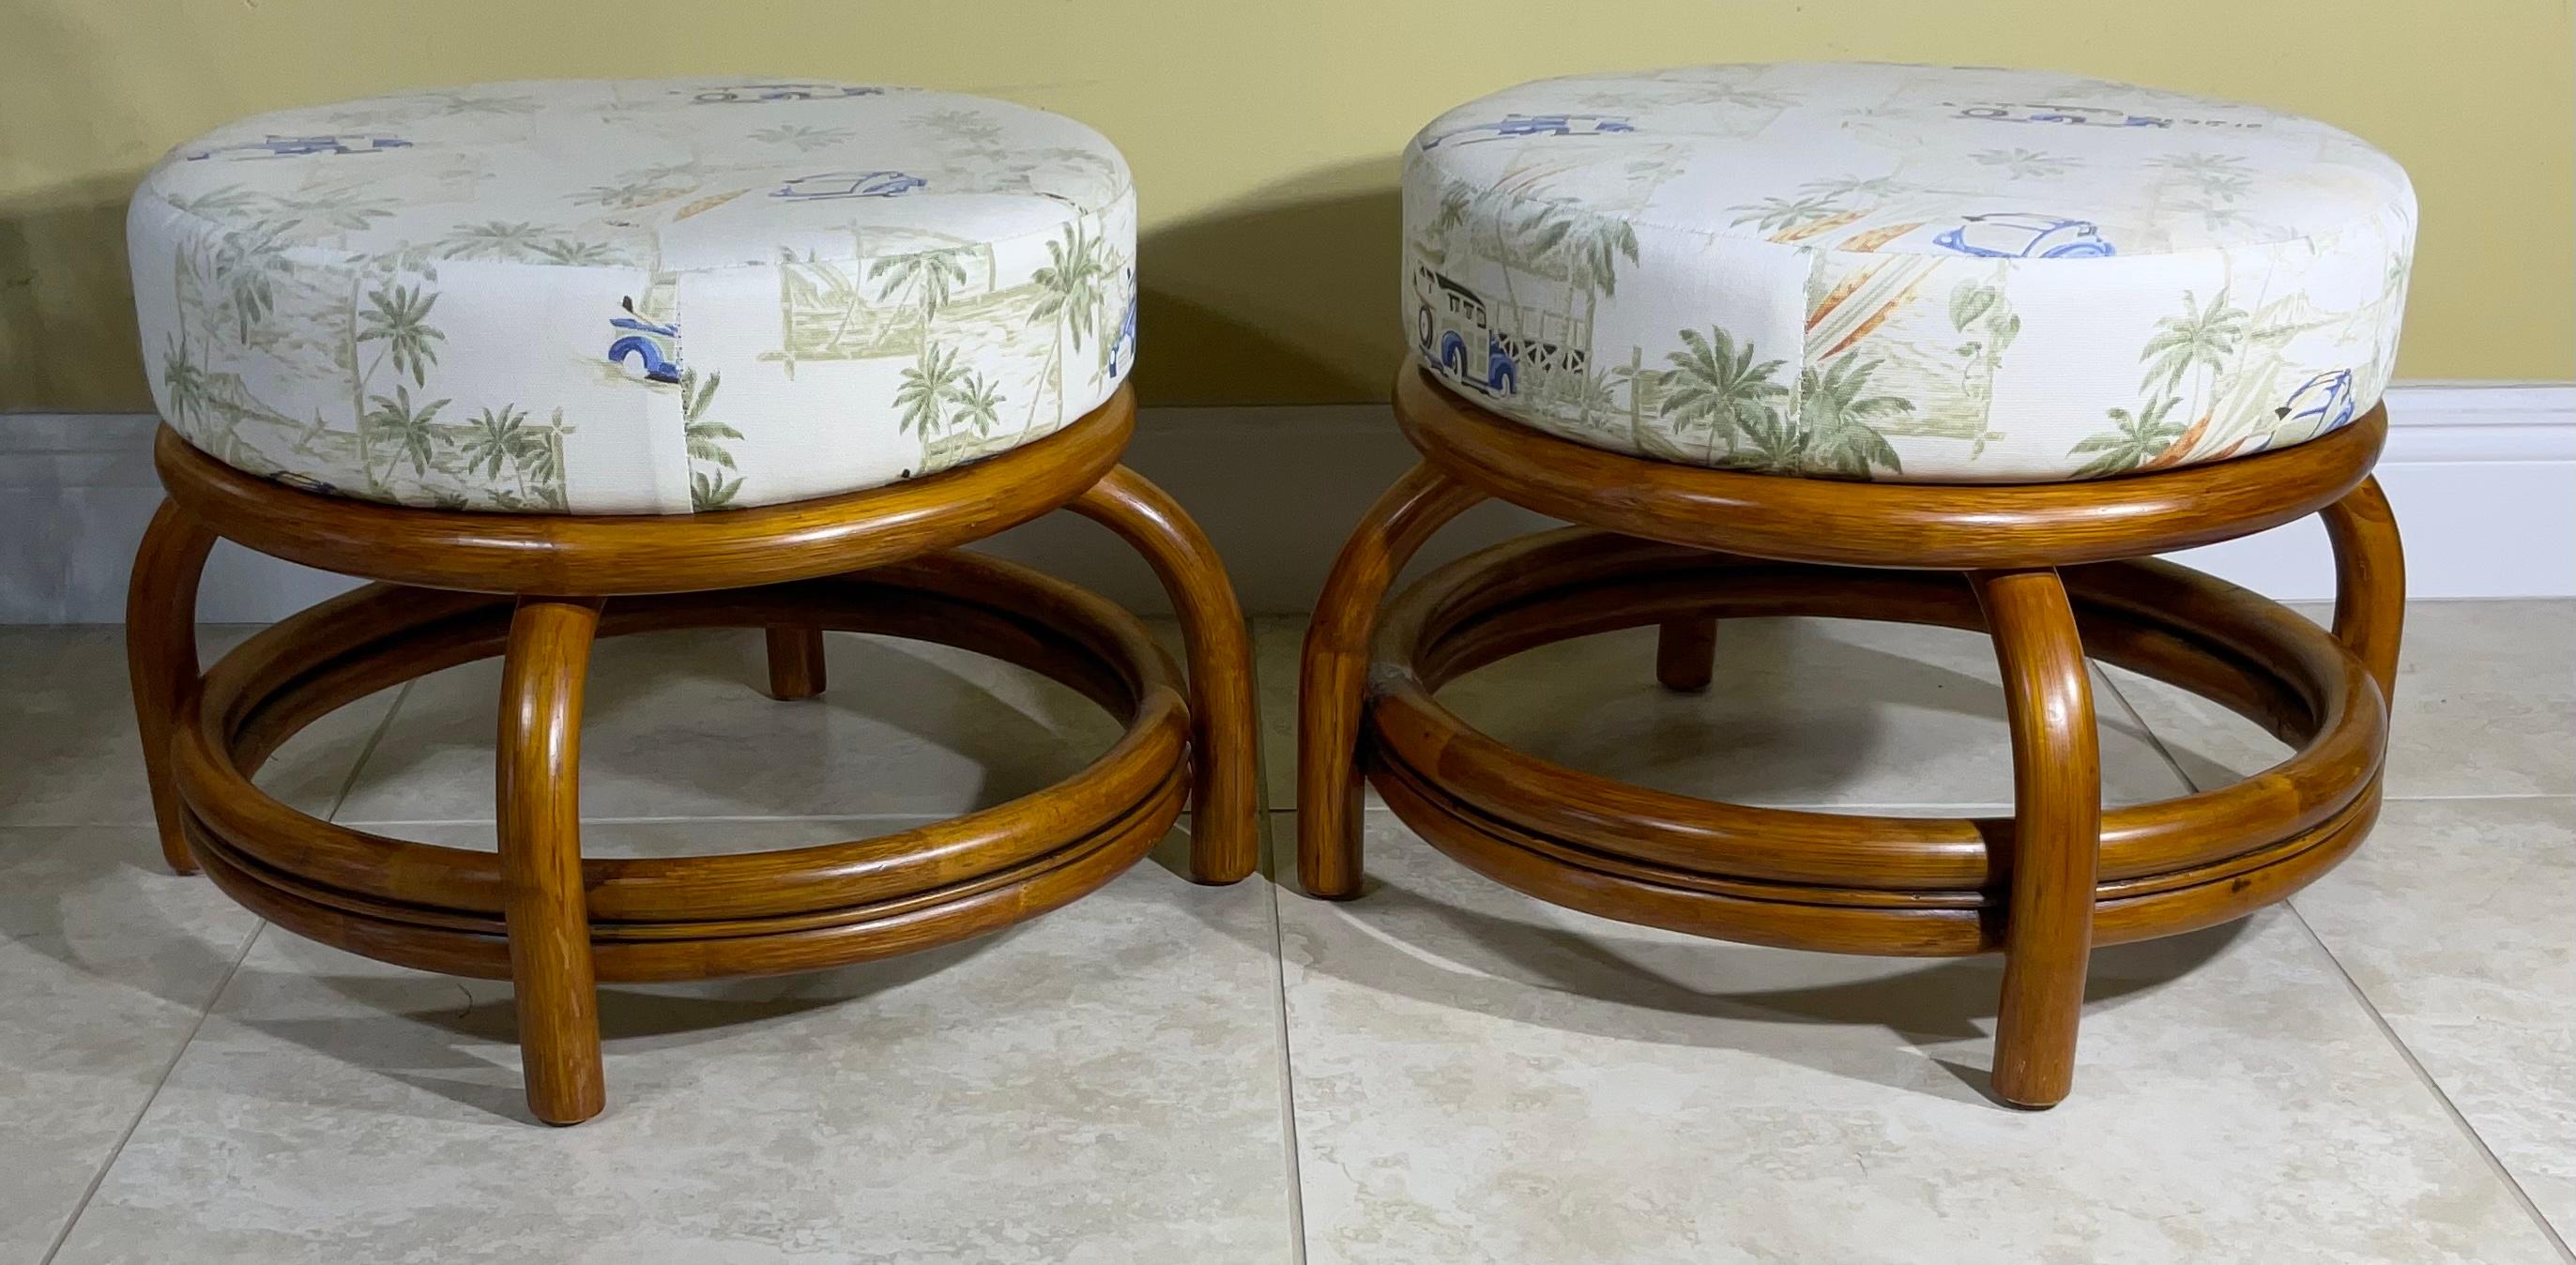 Pair of beautiful original vintage bamboo stools. Made by Leader’s Casual Furniture, very comfortable and strong to sit on. Original, faded upholstery print Both identical and in the same good vintage condition.
Sold as set only.